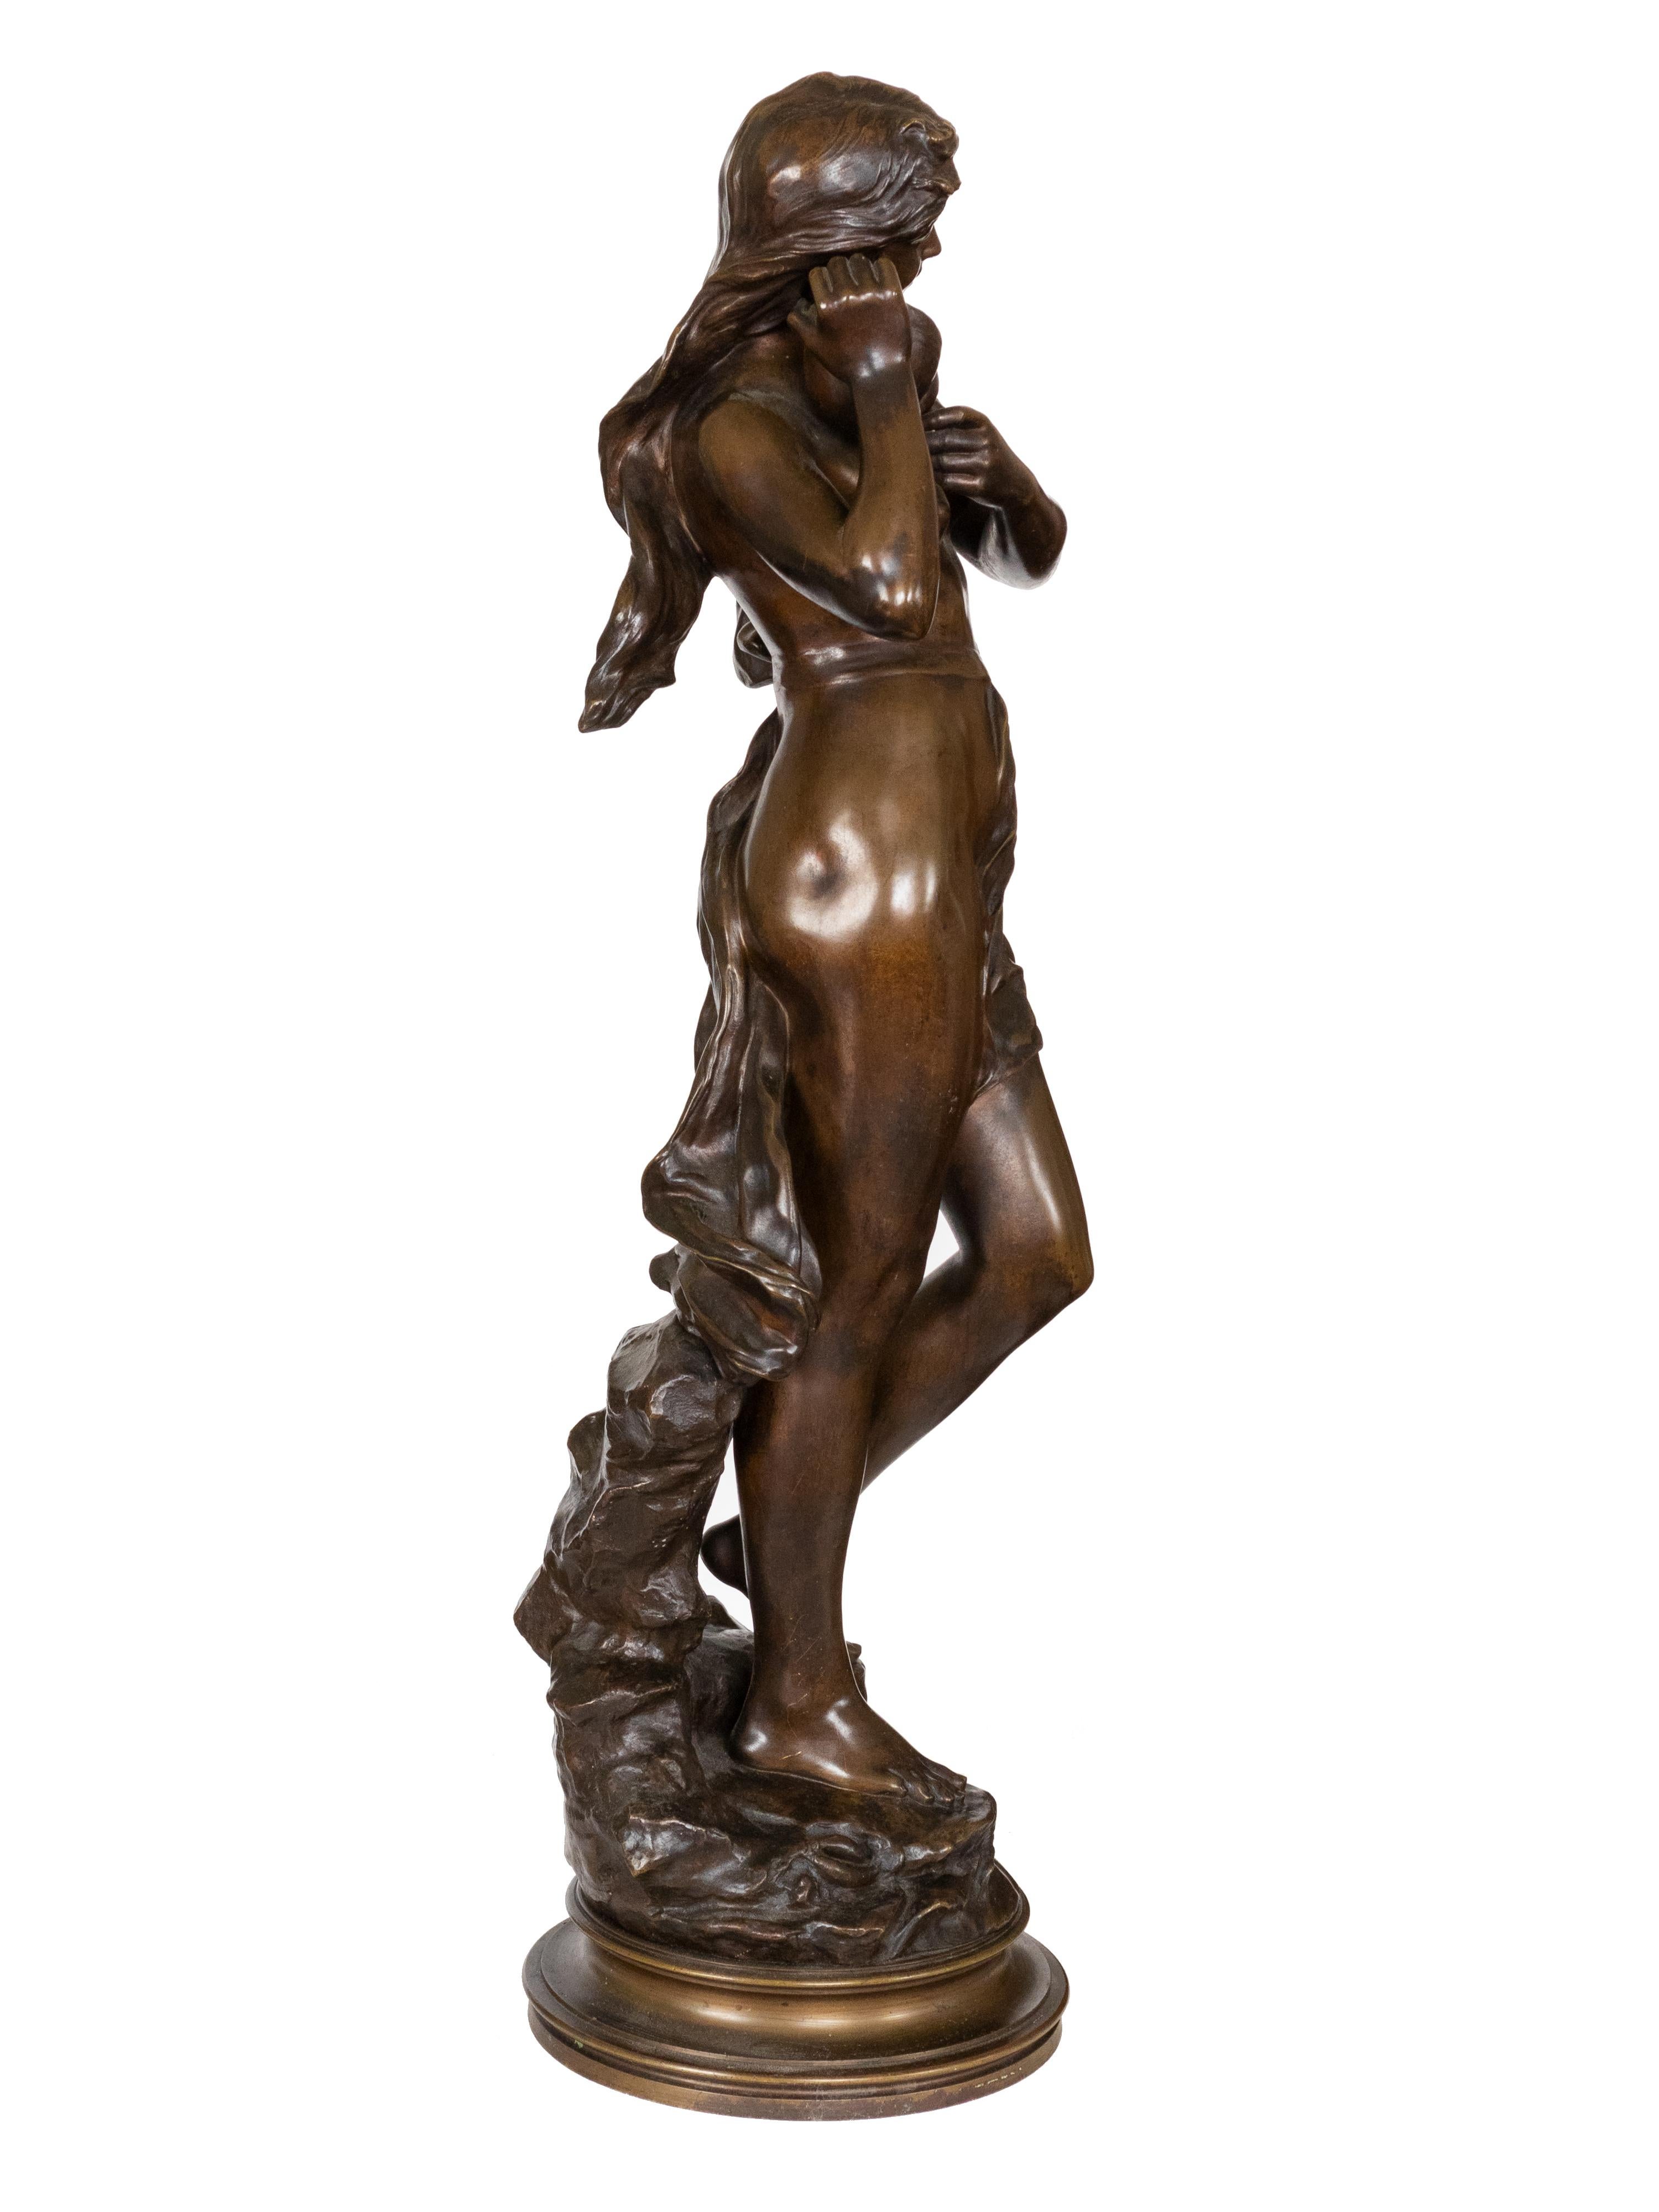 Eurydice, one of the Nereids, is depicted in a bronze statue from the 19th century. Her long hair flows freely amidst a rocky landscape and she wears a conch shell as an earring. The sculpture bears the signature «Eugene Marioton»